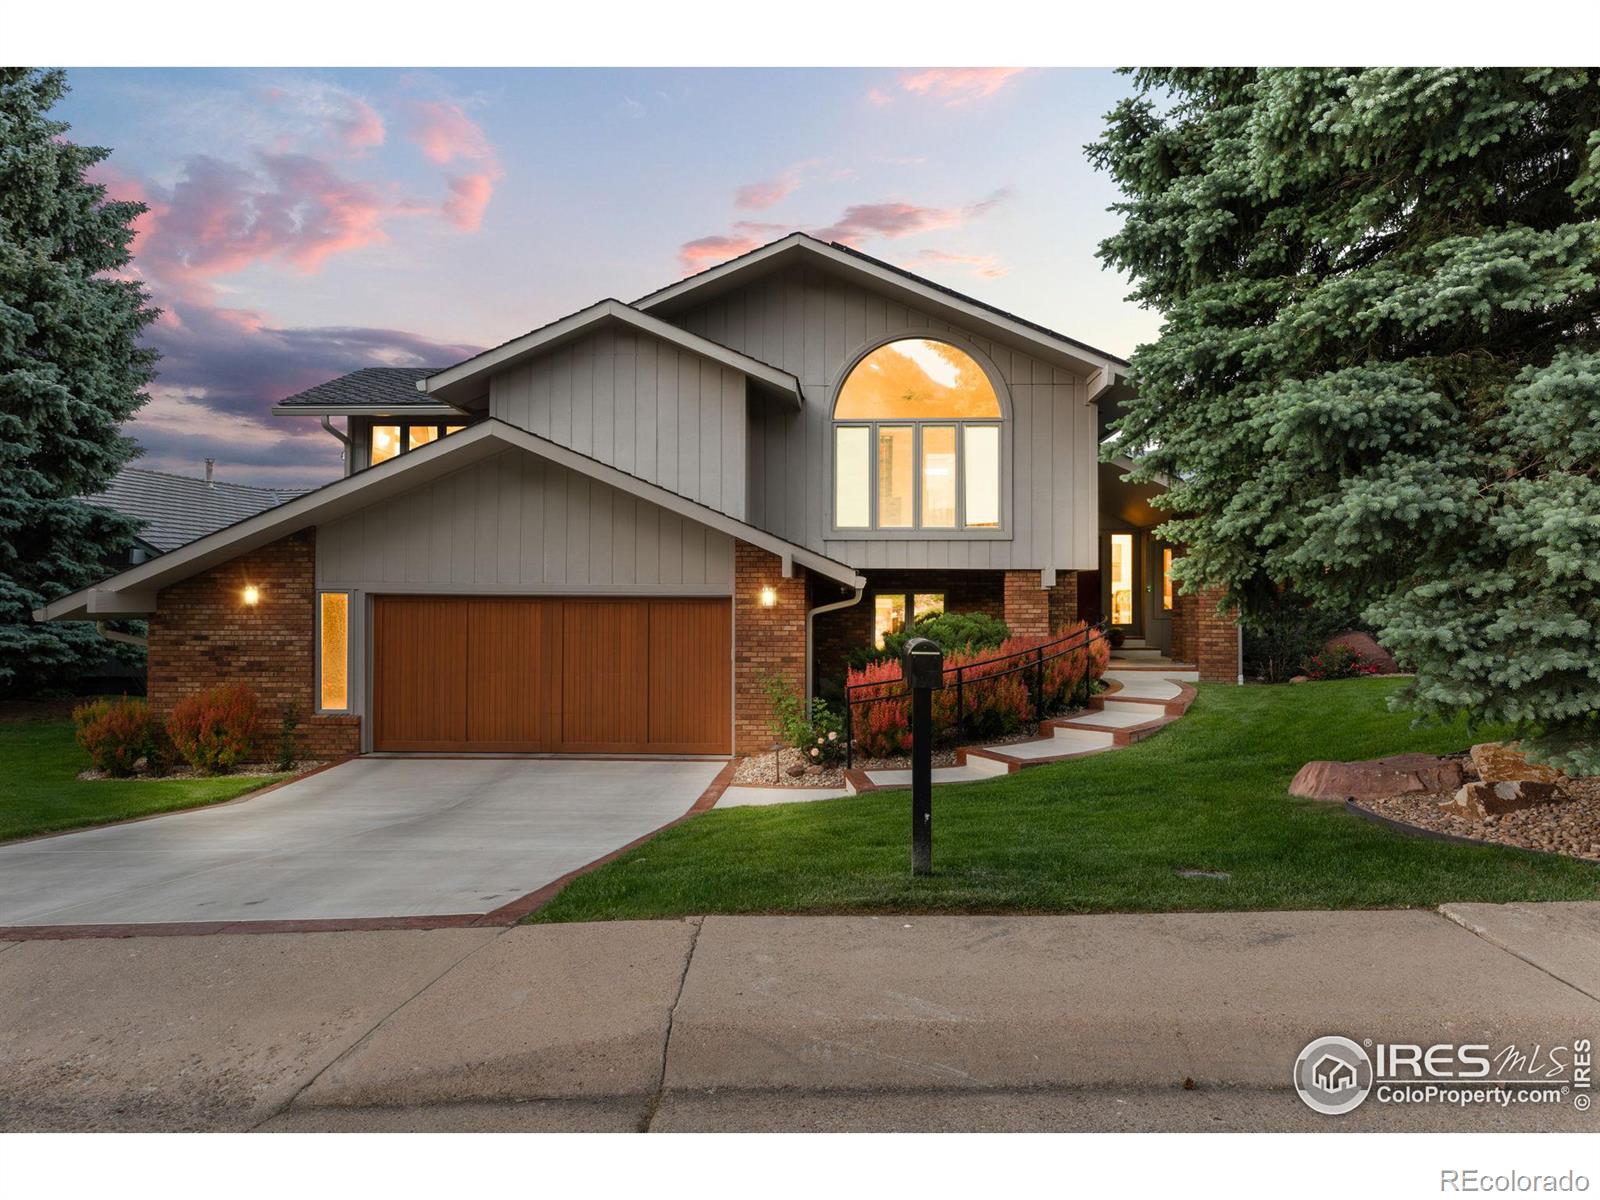 1995  Stony Hill Road, boulder MLS: 4567891011820 Beds: 4 Baths: 4 Price: $3,200,000